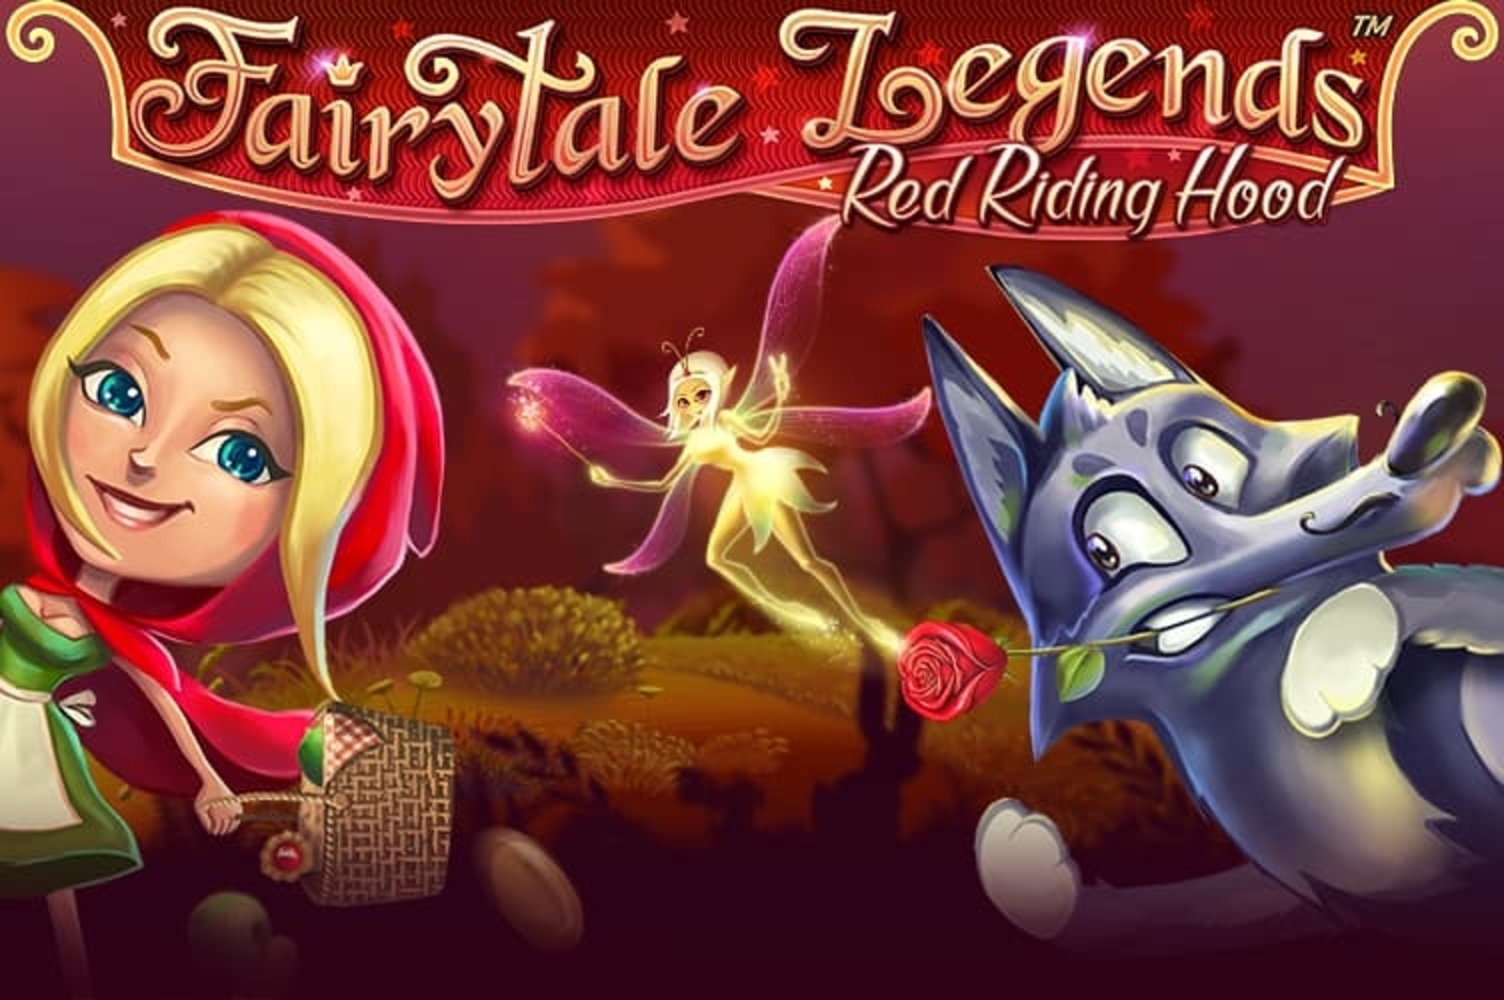 Fairytale Legends: Red Riding Hood demo